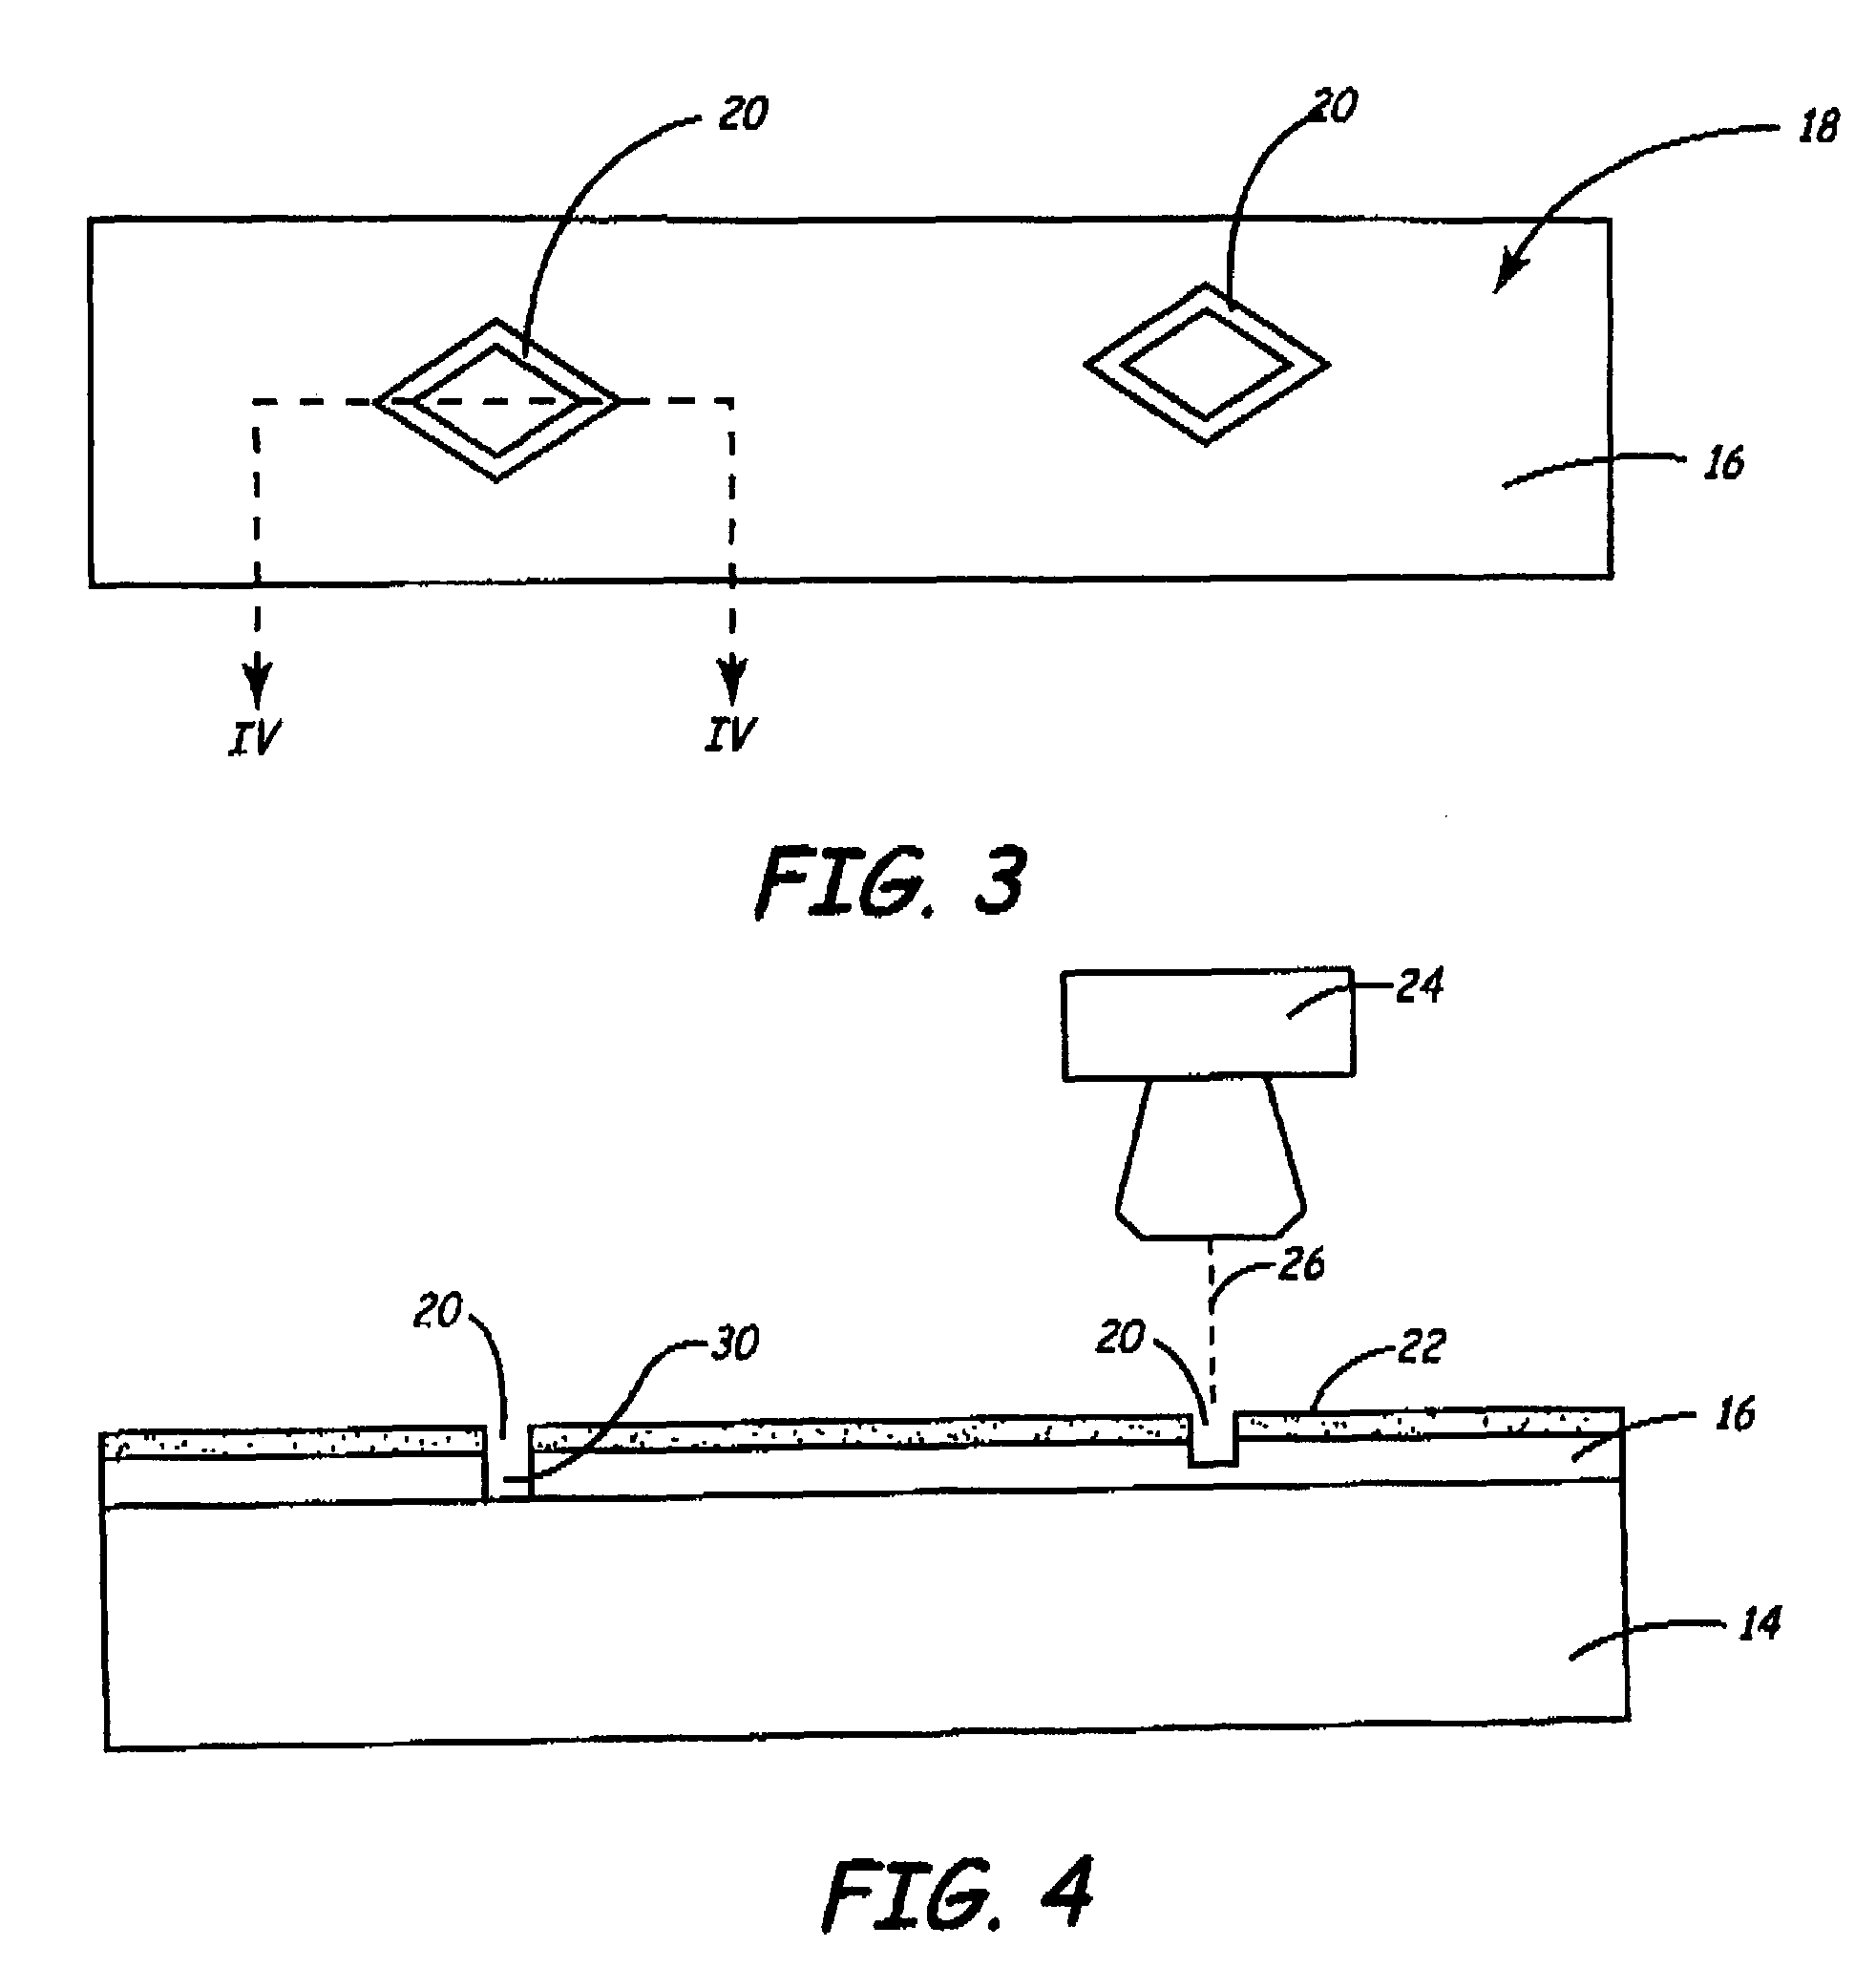 Thin-film magnetic recording head having a timing-based gap pattern for writing a servo track on magnetic media